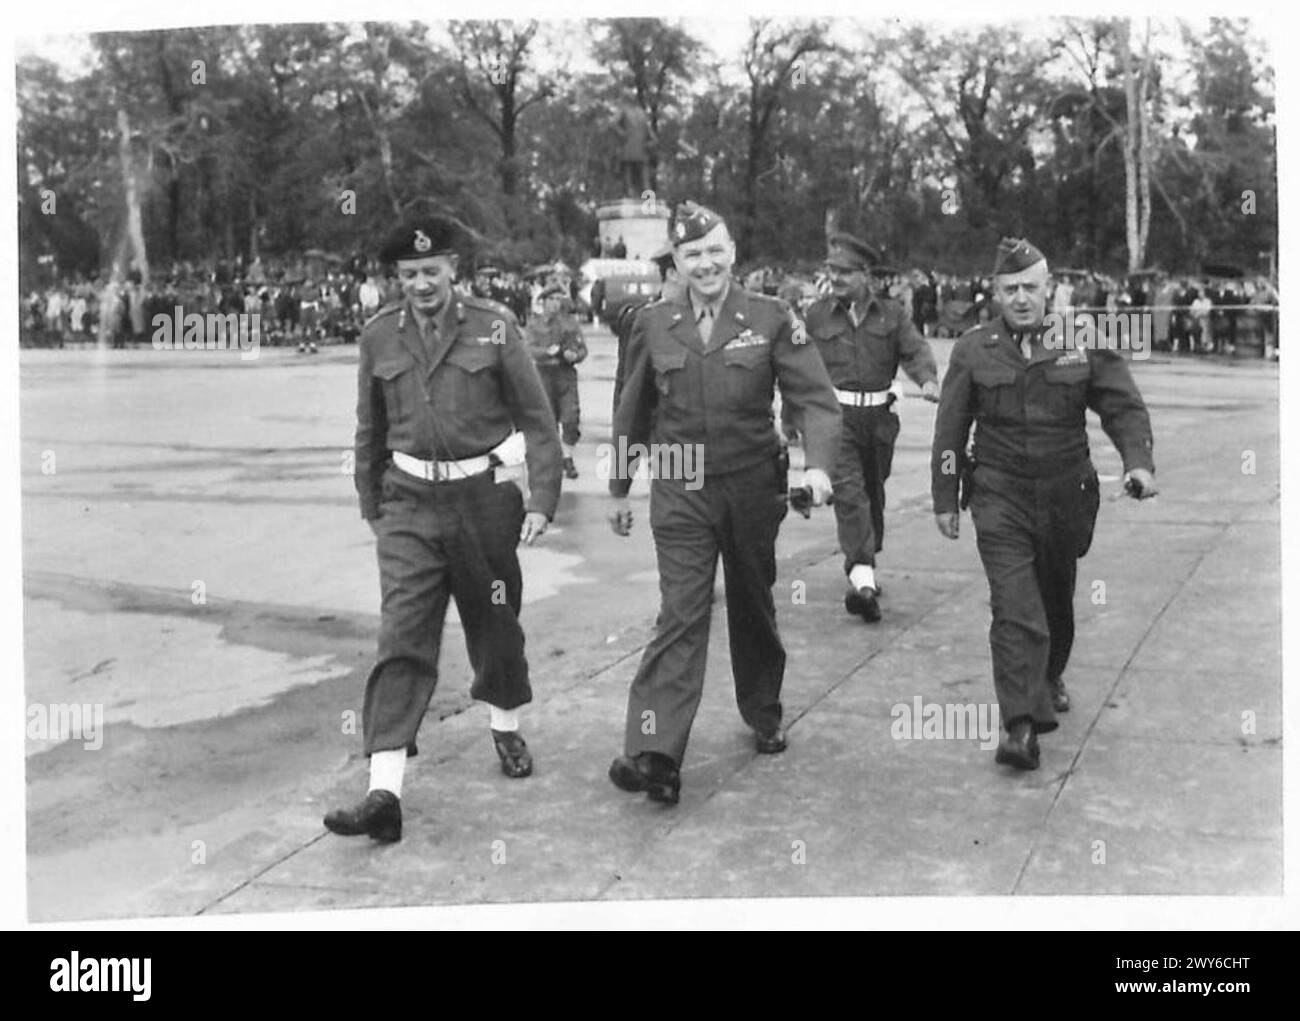 BREAKING THE FLAG CEREMONY IN BERLIN [7TH ARMOURED DIVISION] - Major General L.O.Lyne, Commander British Occupation Troops in Berlin, arriving with high-ranking American officers. , British Army, 21st Army Group Stock Photo